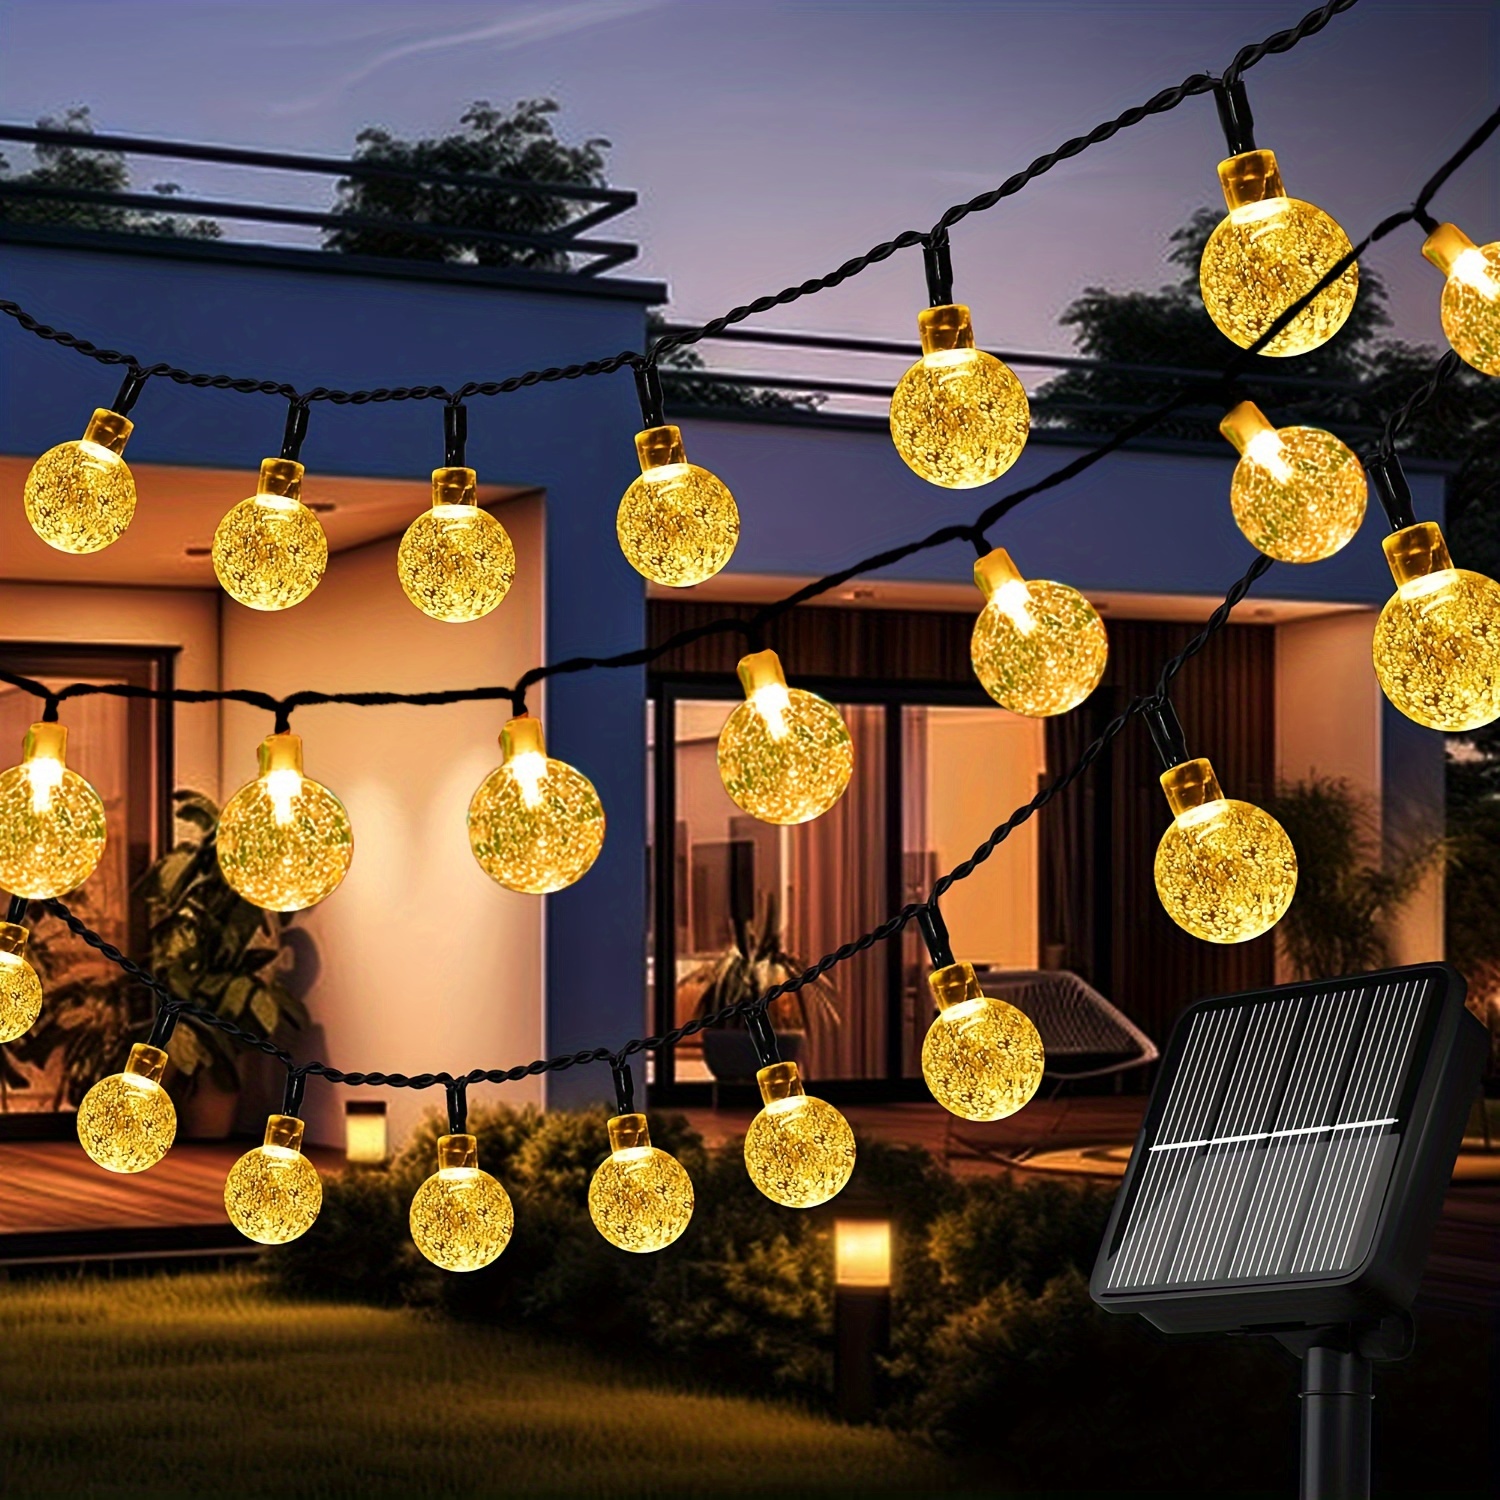 

Solar Fairy Lights Outdoor - 12m With 100 Led Crystal Balls, Waterproof Ip65, 8 Modes, Perfect For Garden, Patio, Balcony, Wedding Decor